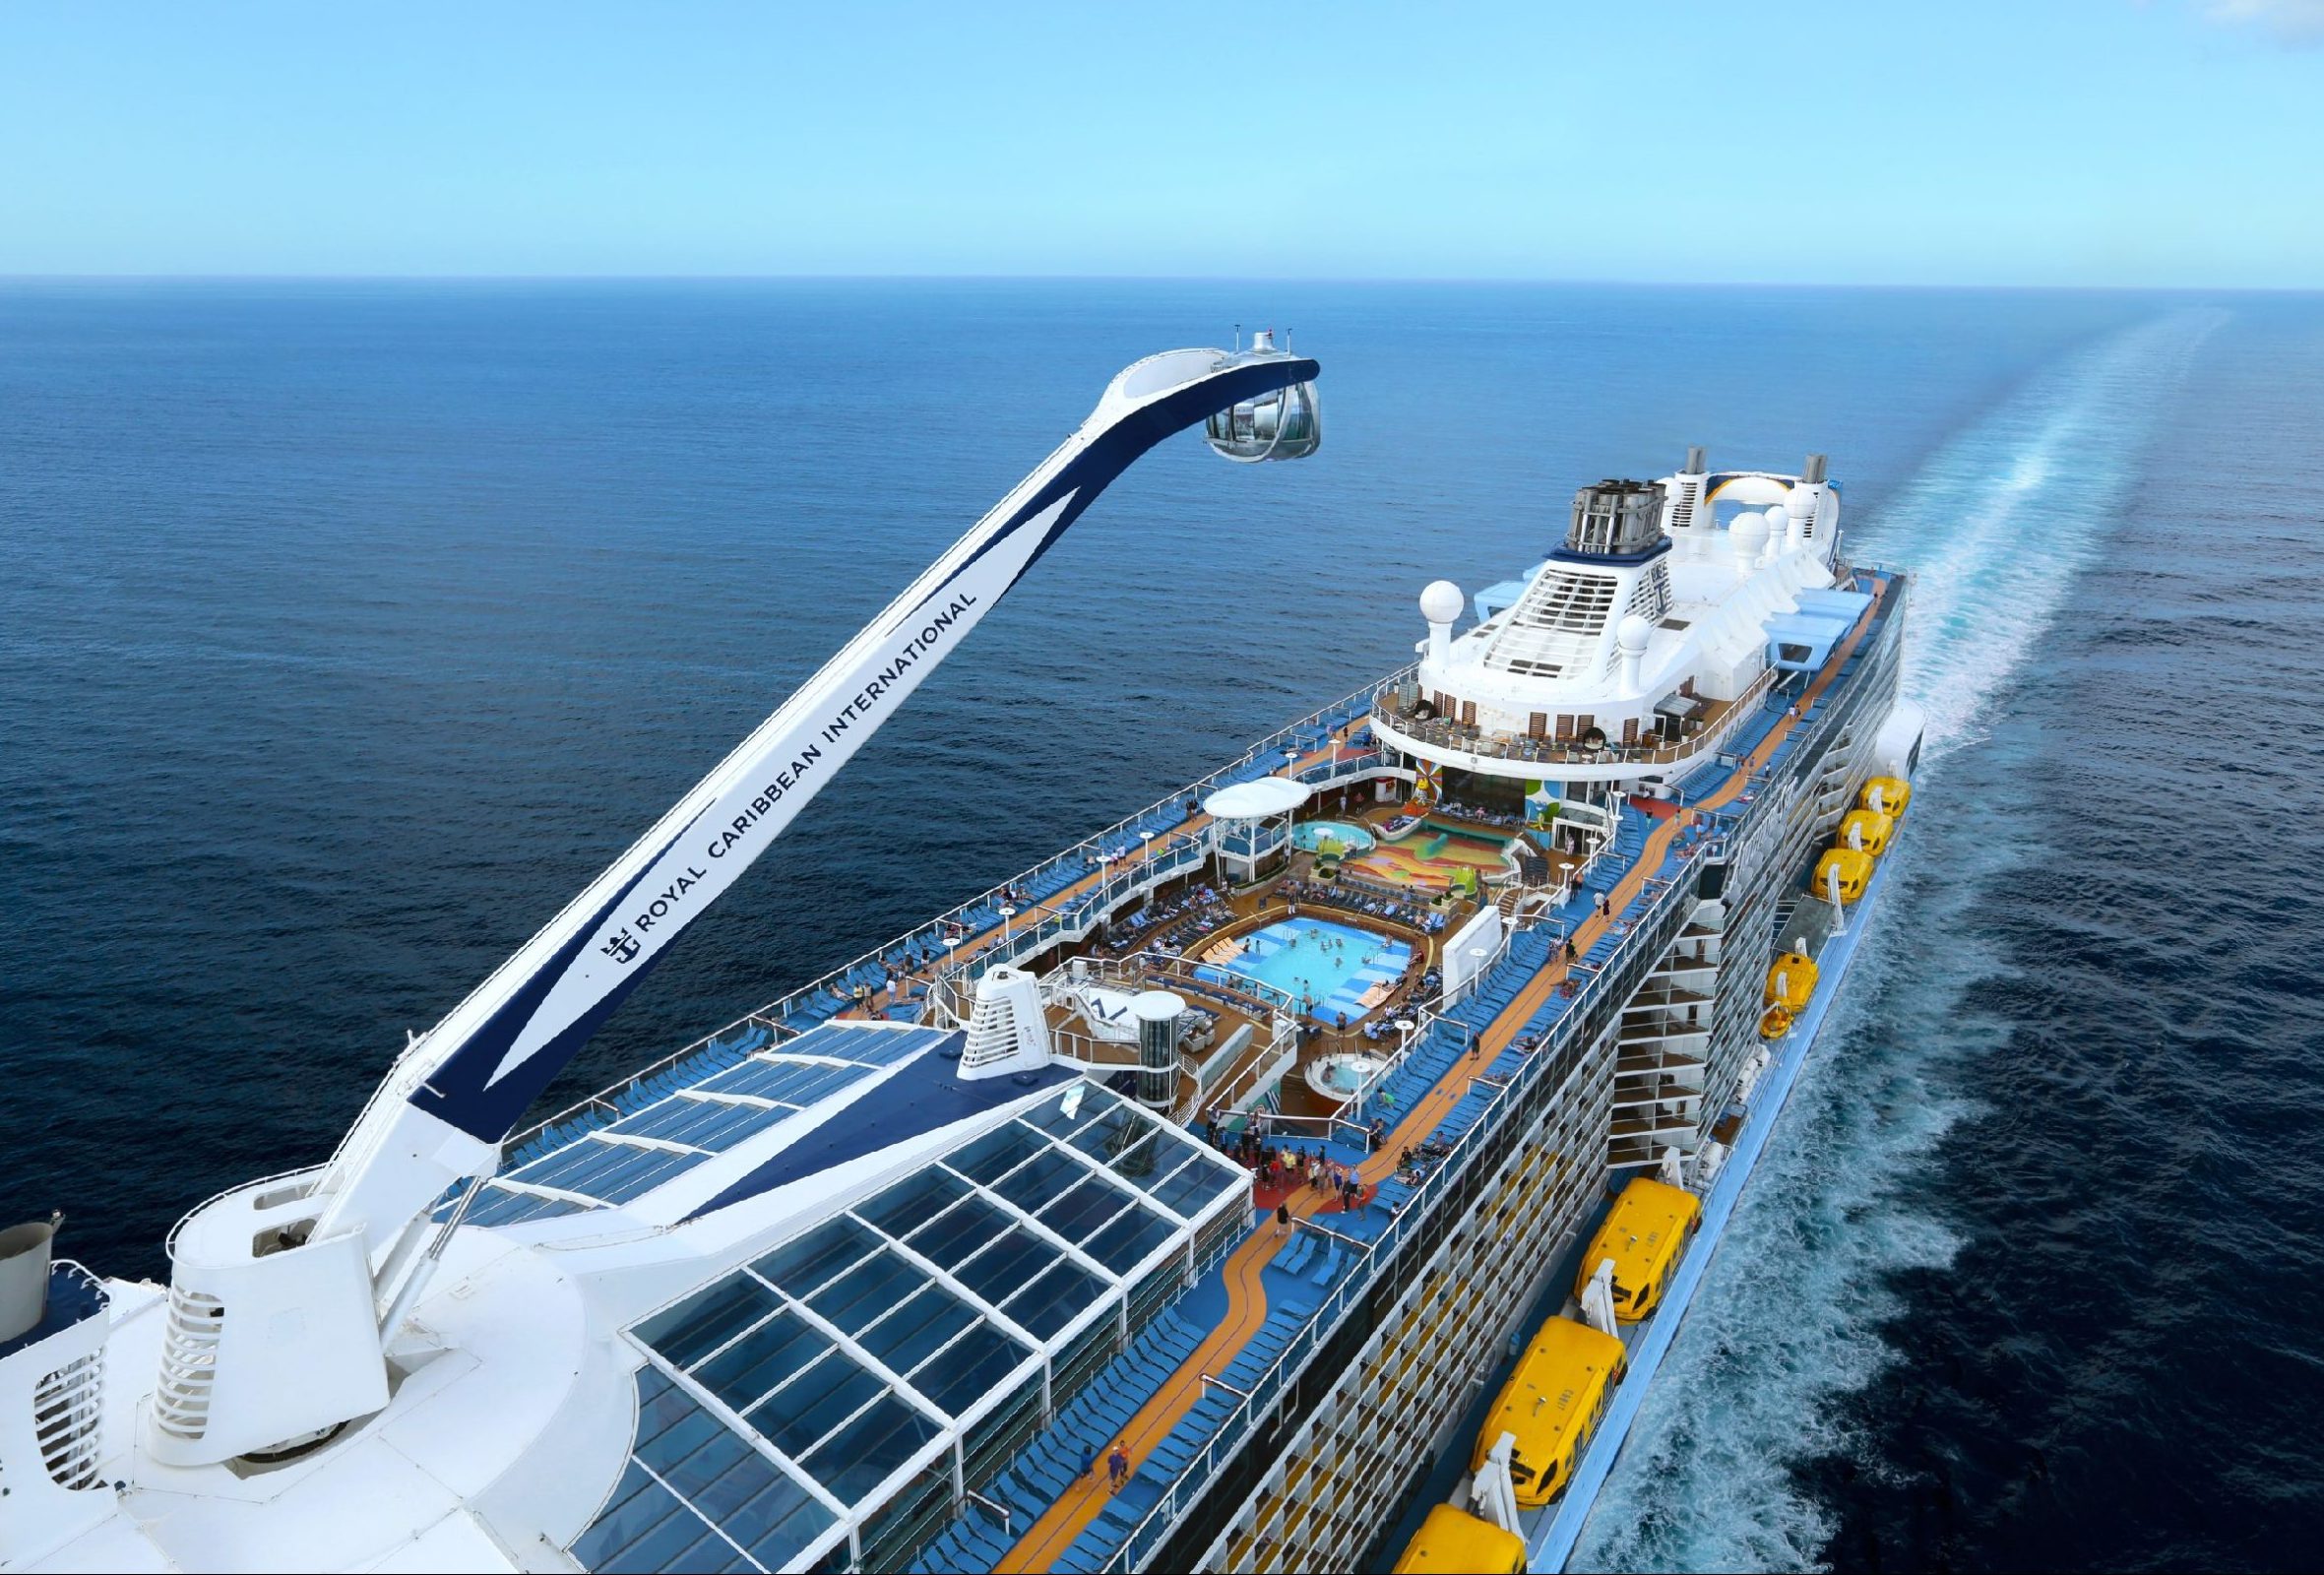 Royal Caribbean announce ground-breaking biofuel testing, accelerating the Industry’s energy transition